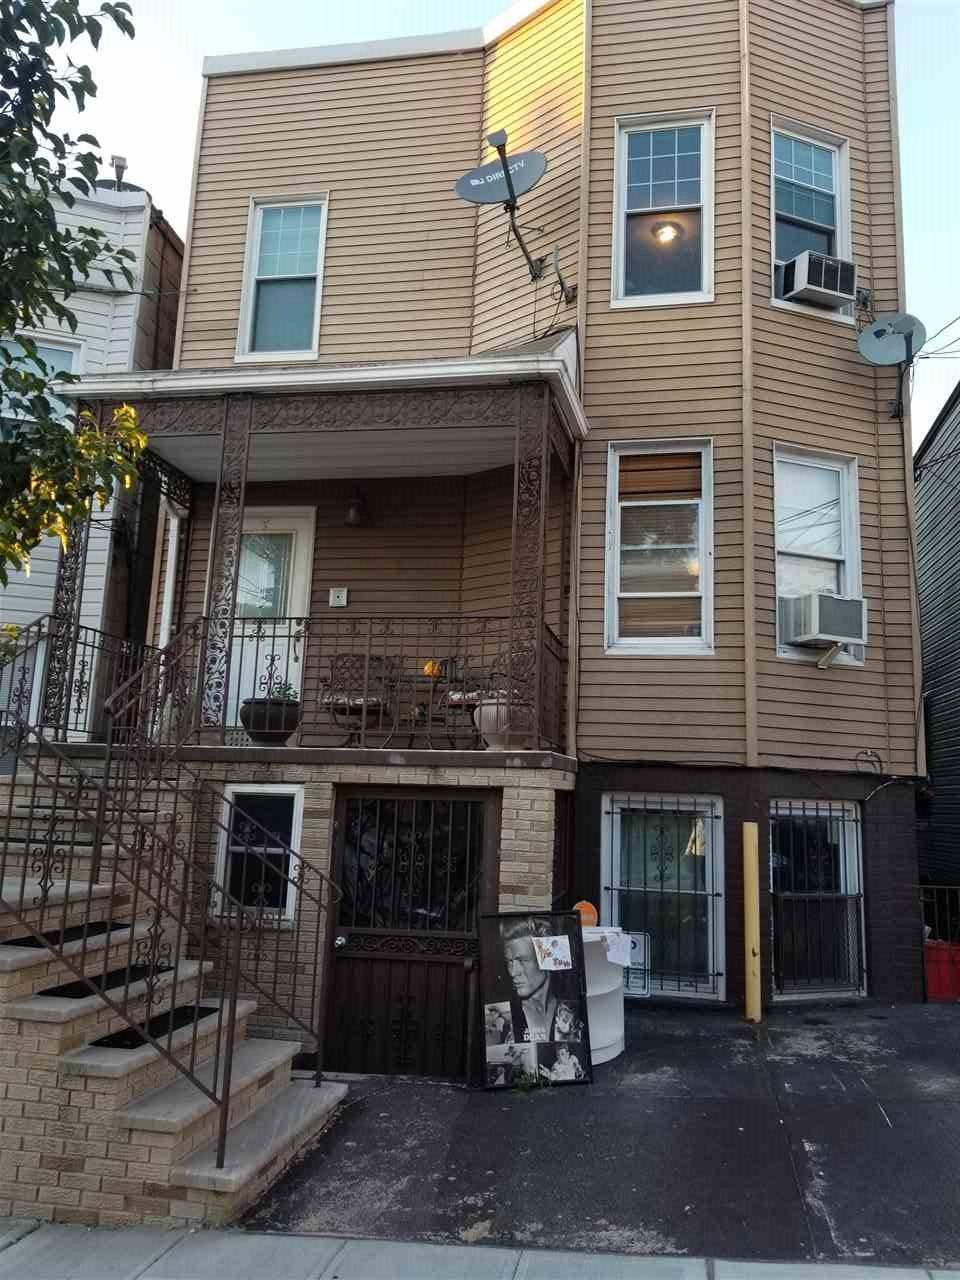 SMALL PET OK UPON LANDLORD APPROVAL - 3 BR New Jersey